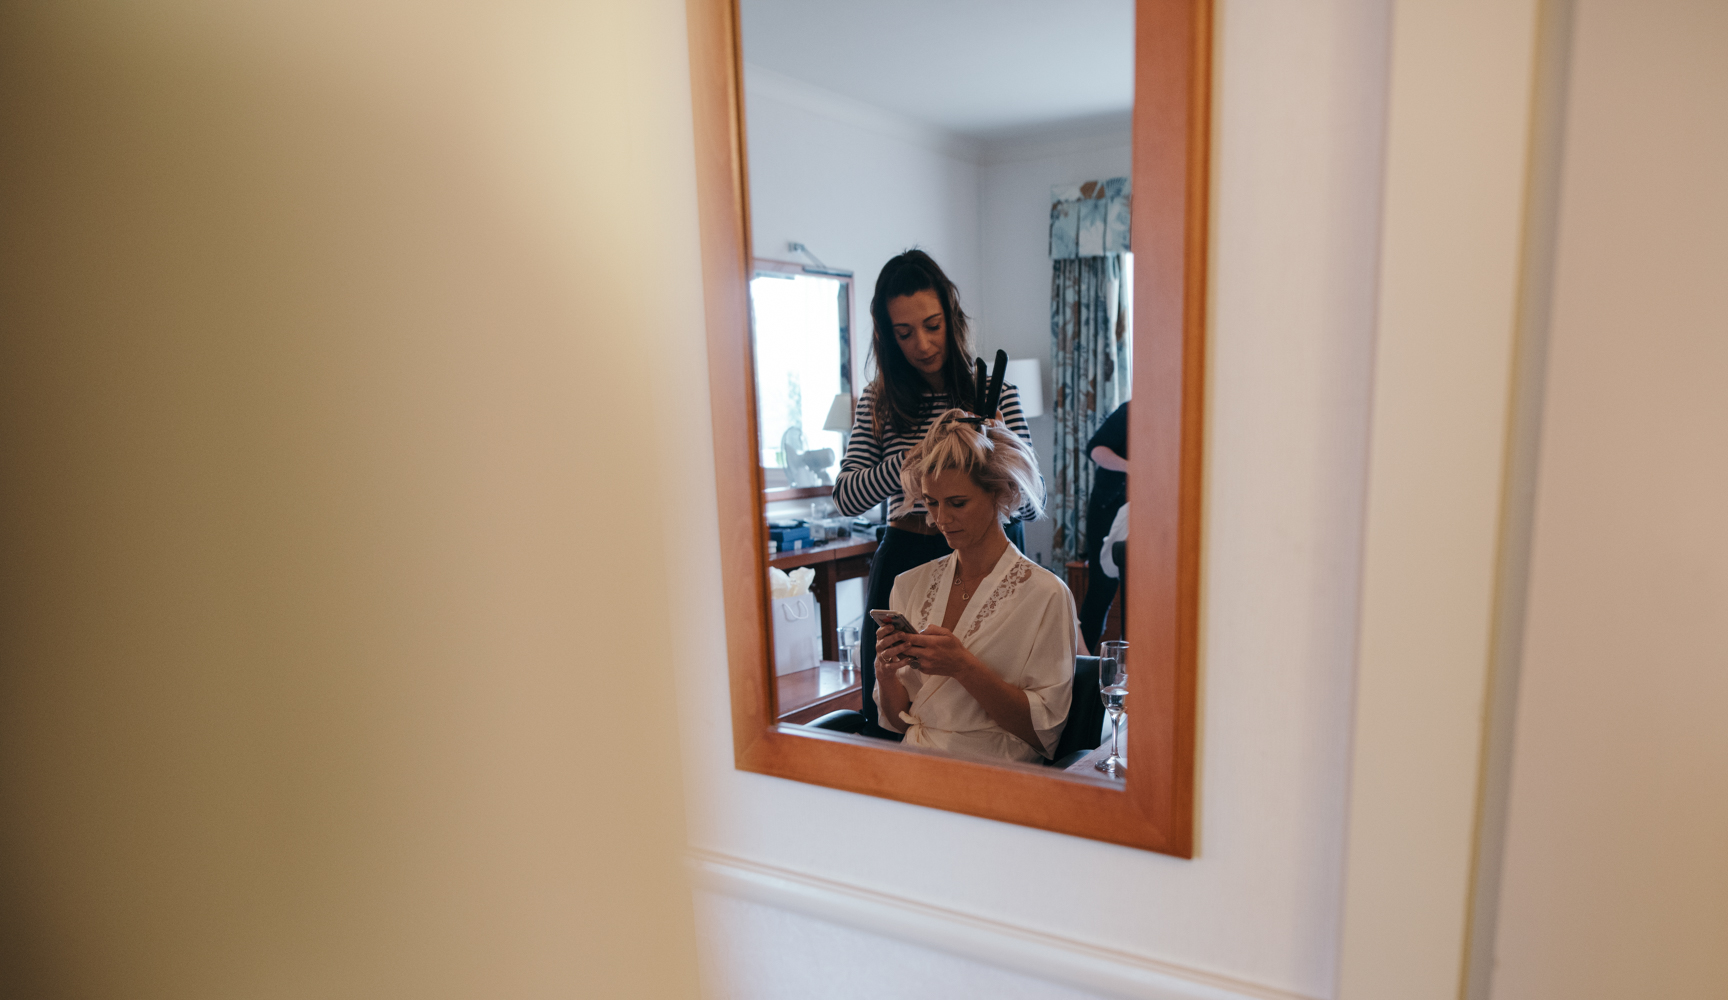 A bridesmaids reflection in a mirror during morning bridal preparations